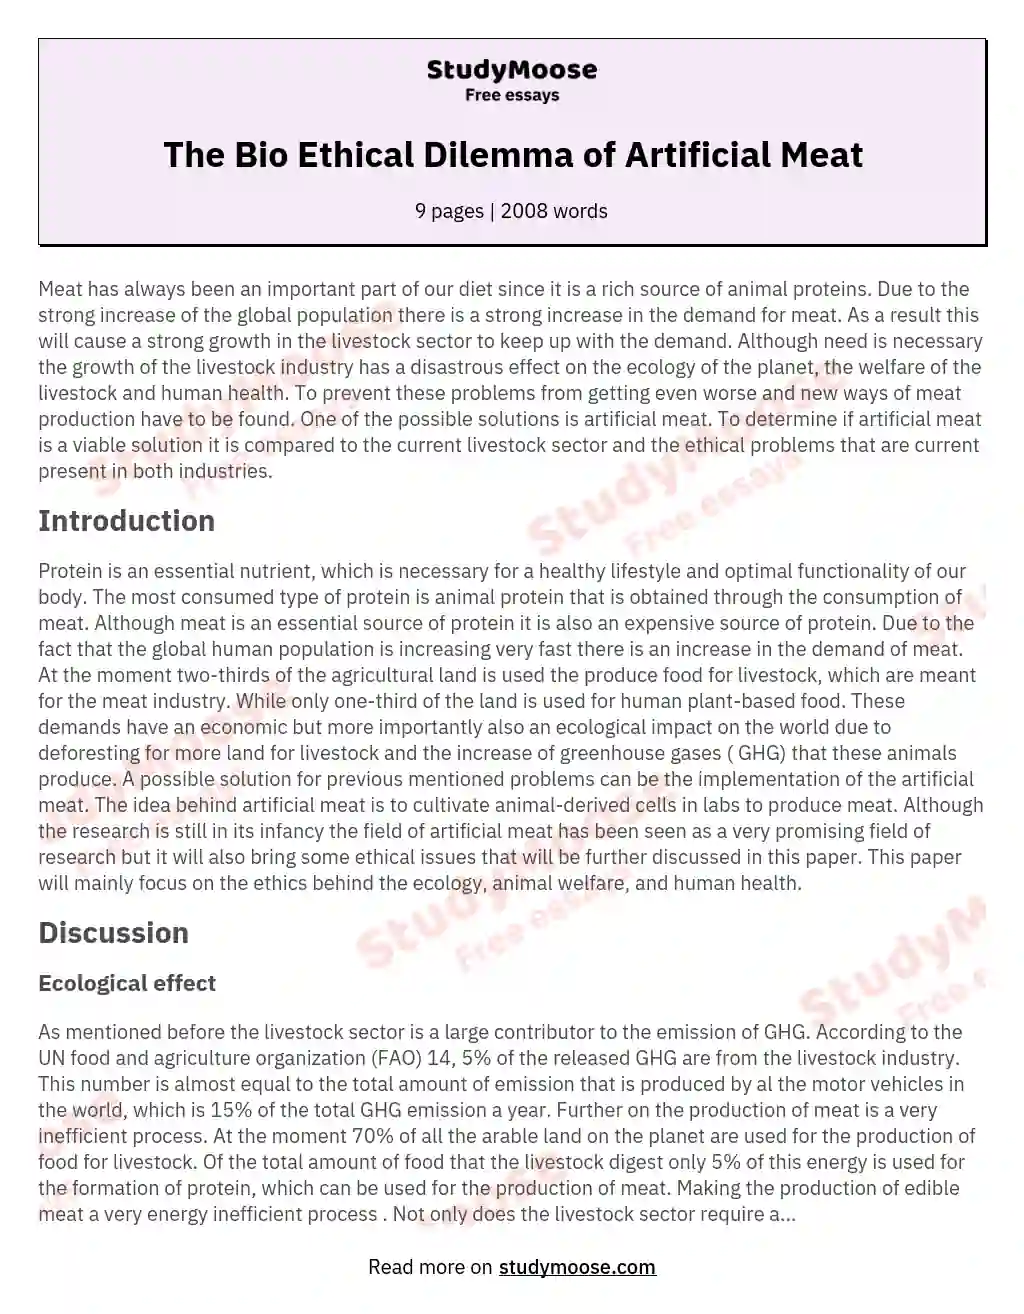 The Bio Ethical Dilemma of Artificial Meat essay